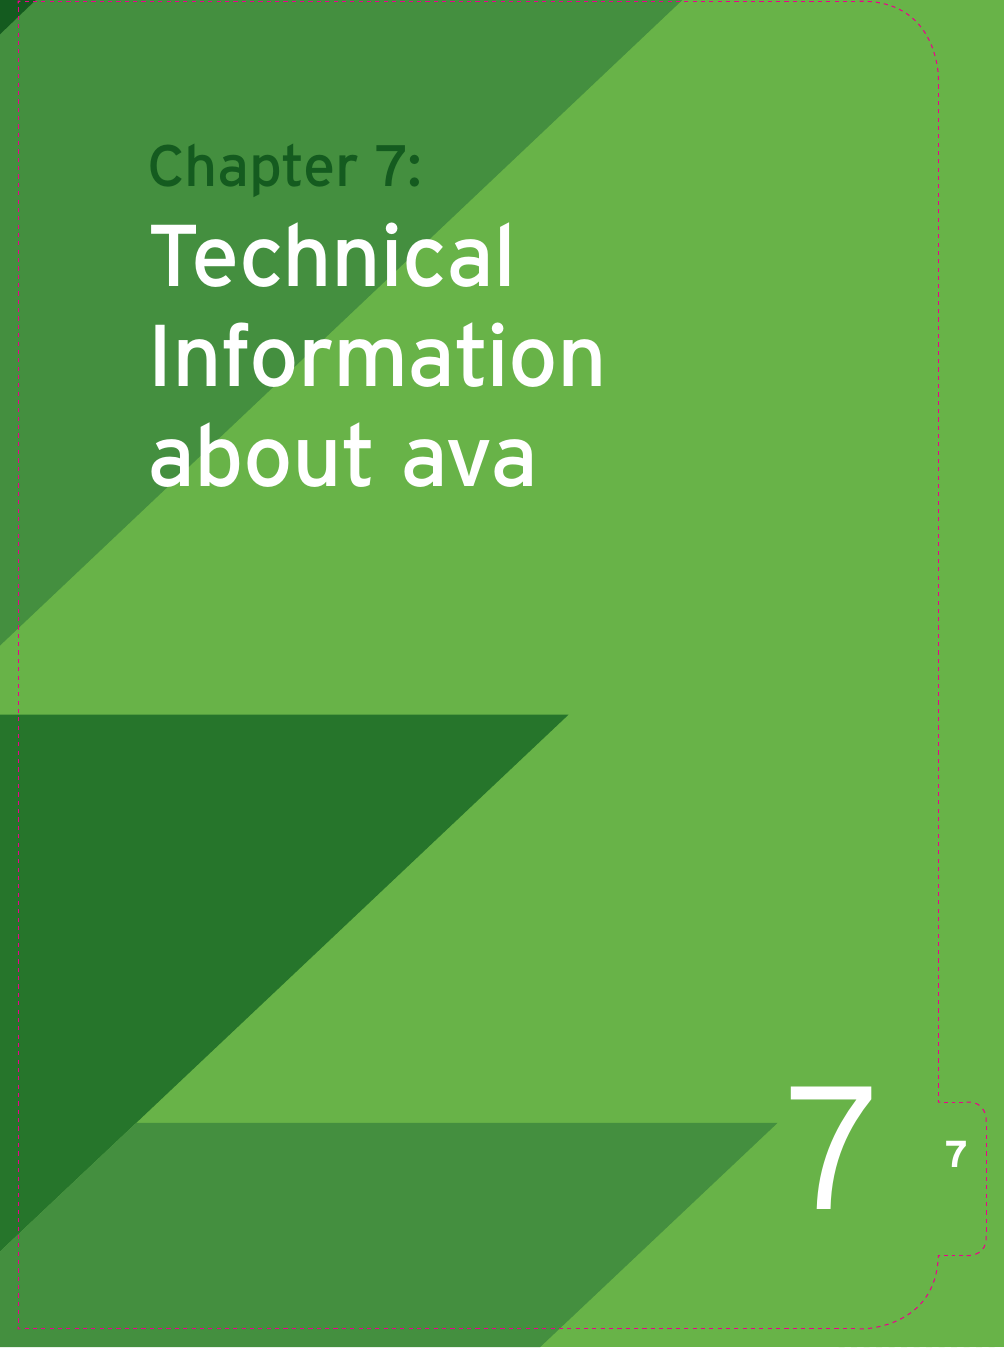 7Chapter 7: Technical Information about ava7